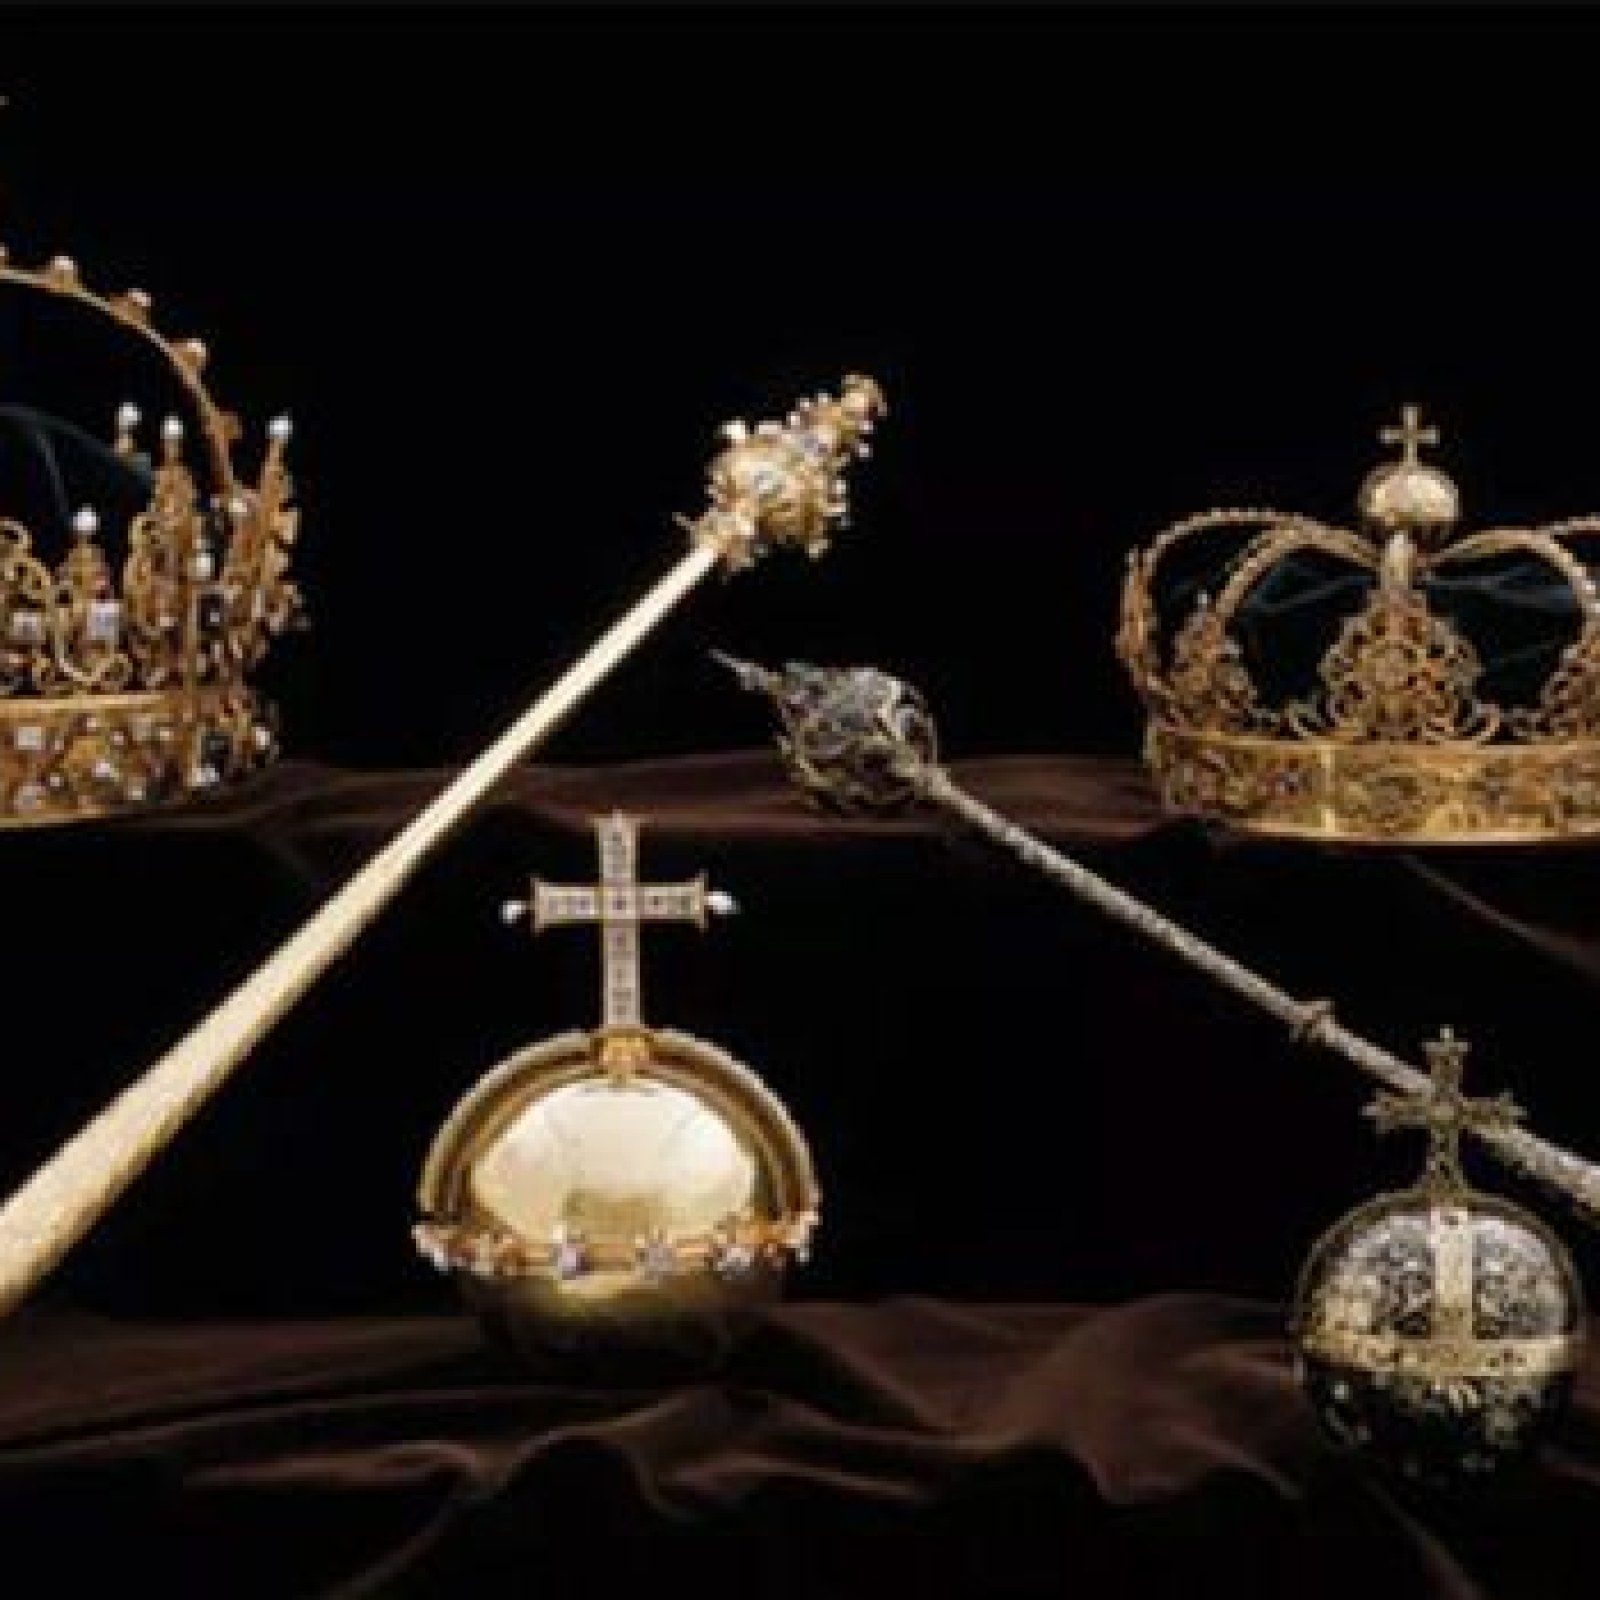 Sweden's Priceless Royal Crown Jewels in Broad Daylight; Thieves Chased by Police on Motorboats